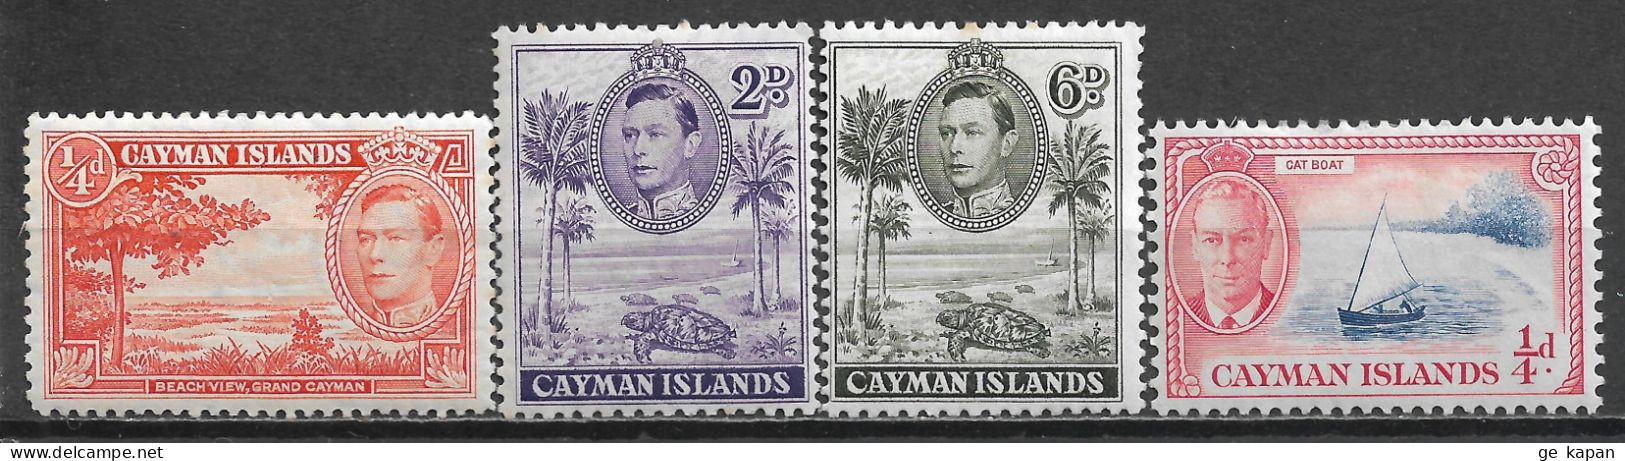 1938-1950 CAYMAN ISLANDS Set Of 4 MLH STAMPS (Michel # 101A,105A,110b,123) - Kaimaninseln